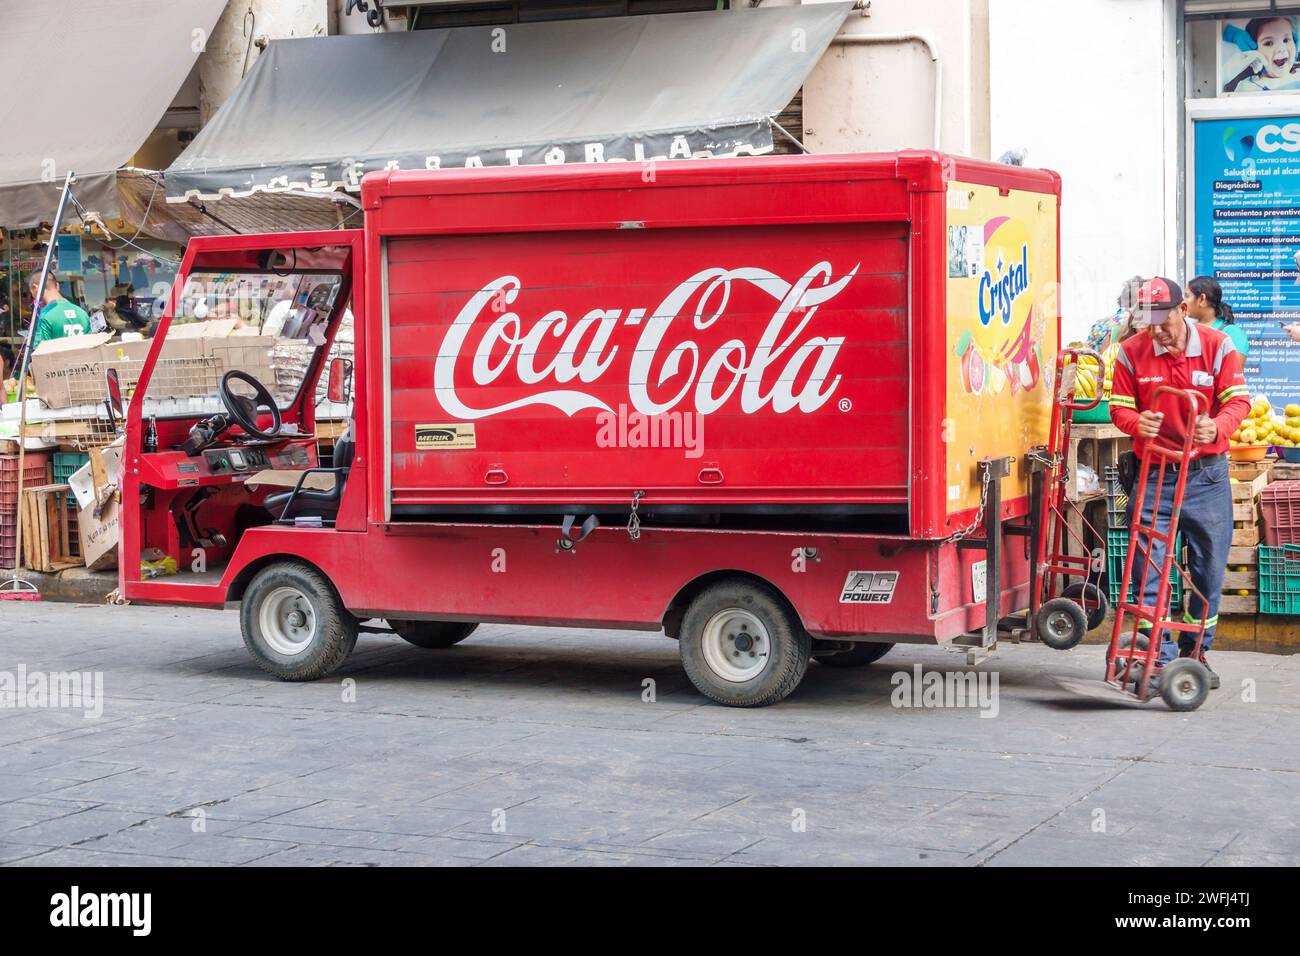 Merida Mexico,centro historico central historic district,Calle 56,Coca-Cola delivery van truck,worker driver using dolly,man men male,adult adults,res Stock Photo